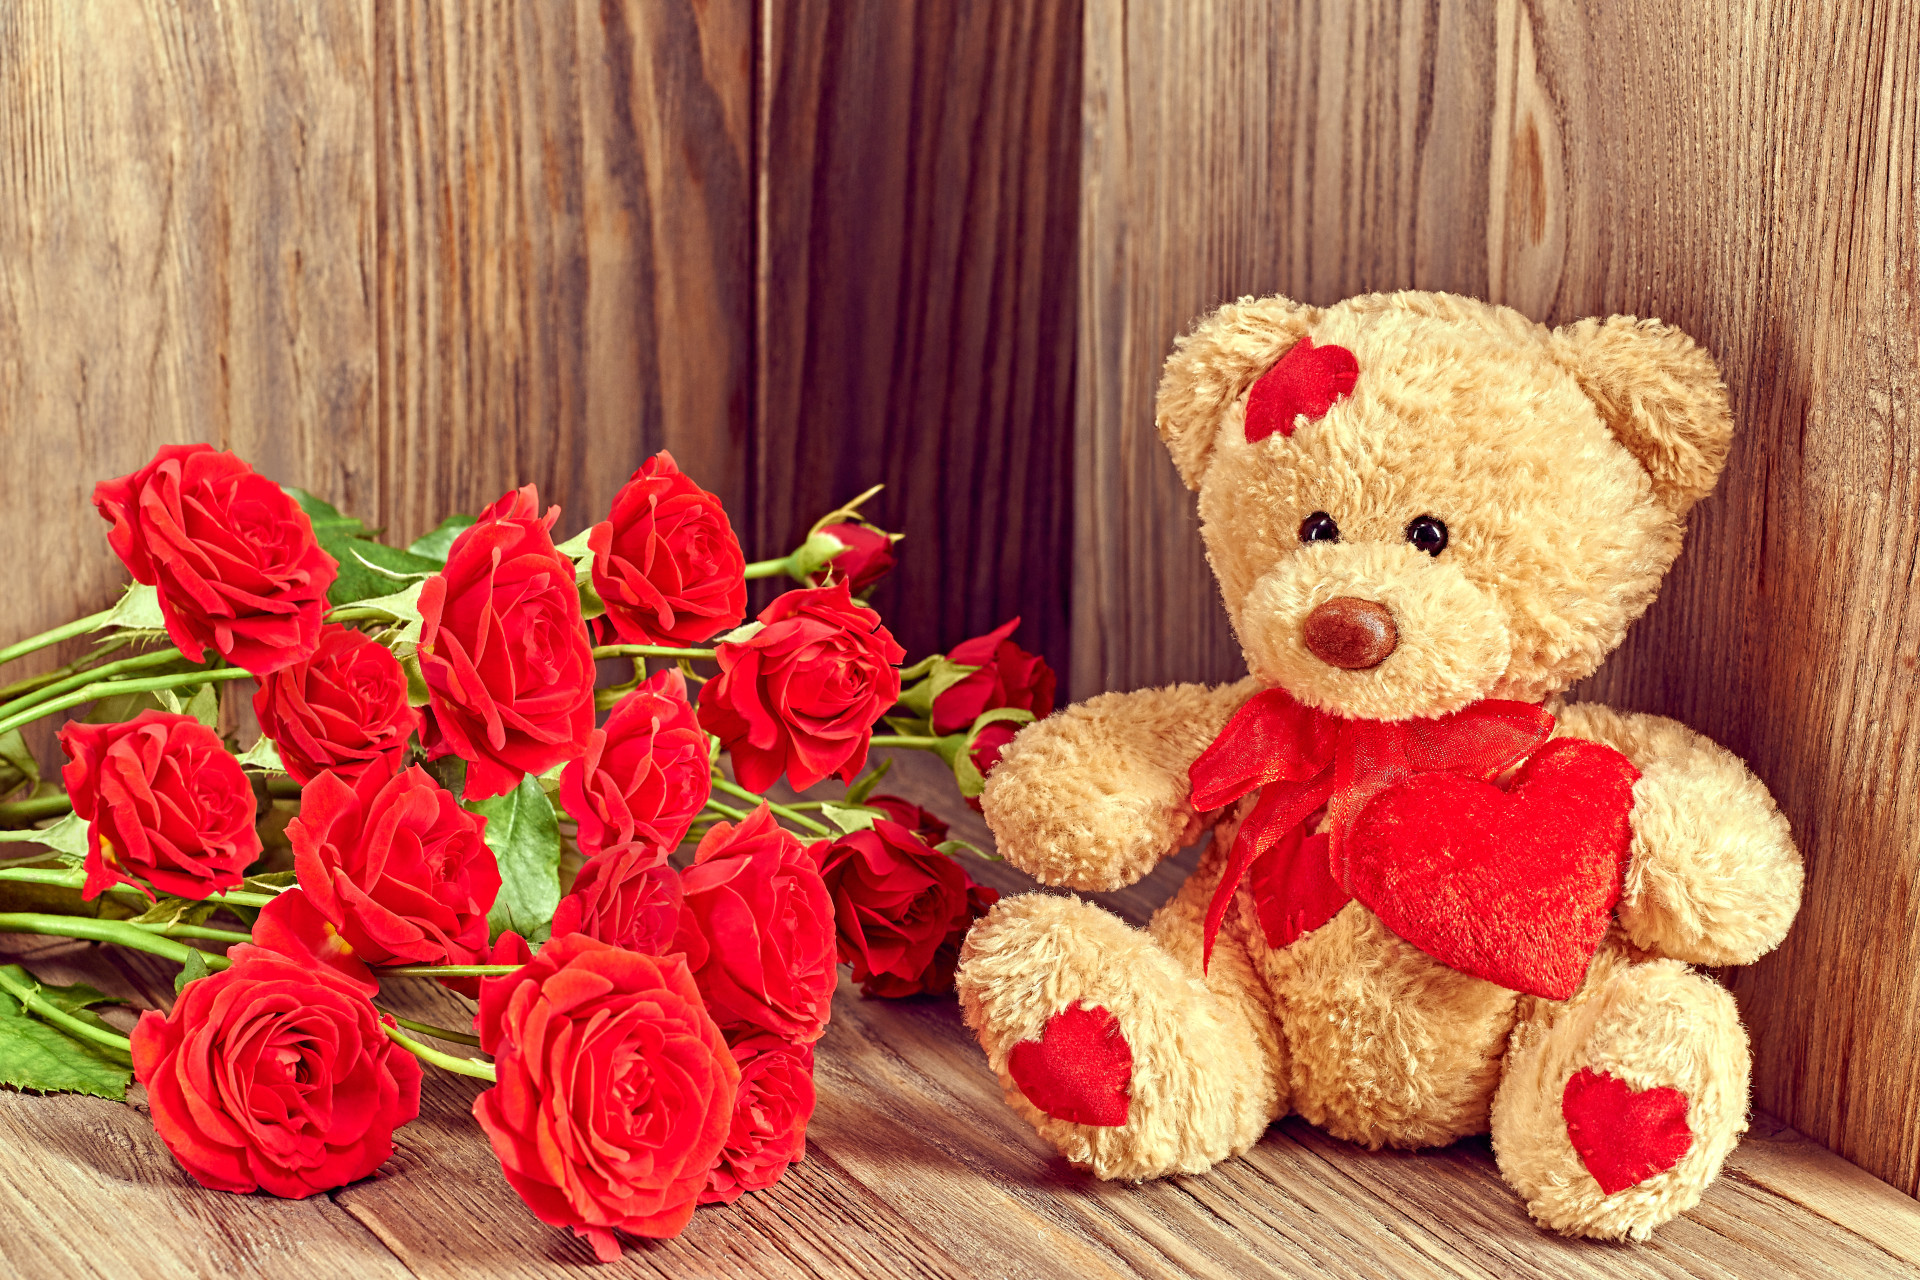 1920x1280 red roses cute teddy bear picture background wallpaper